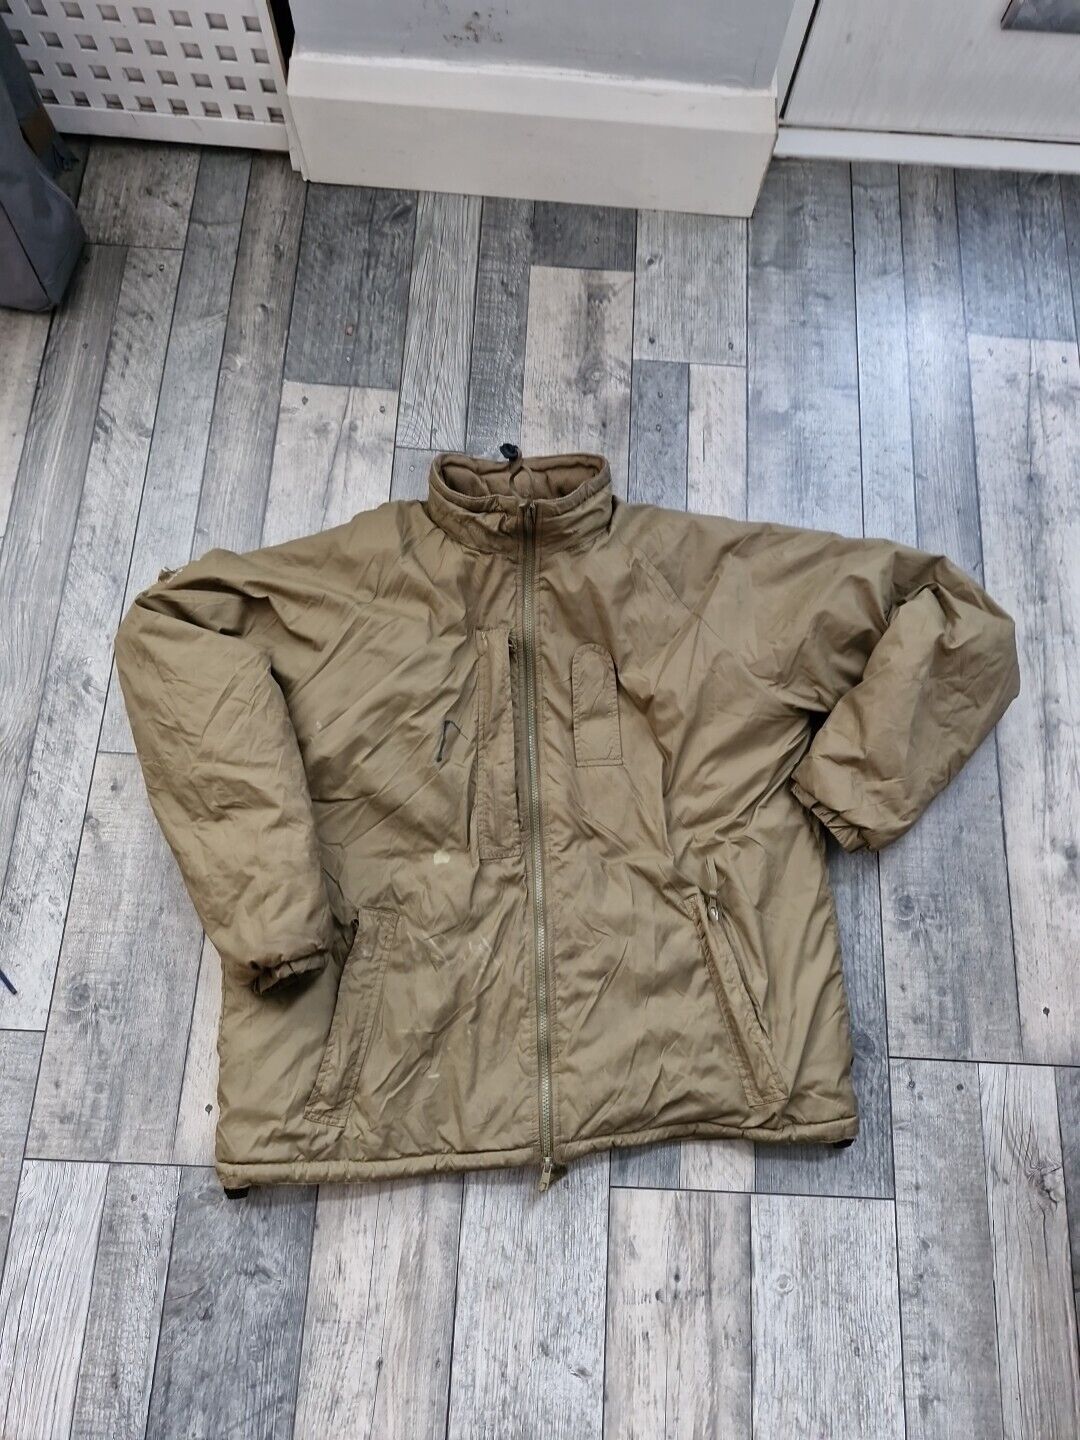 British Army Issue Softie Jacket Thermal Used Mtp